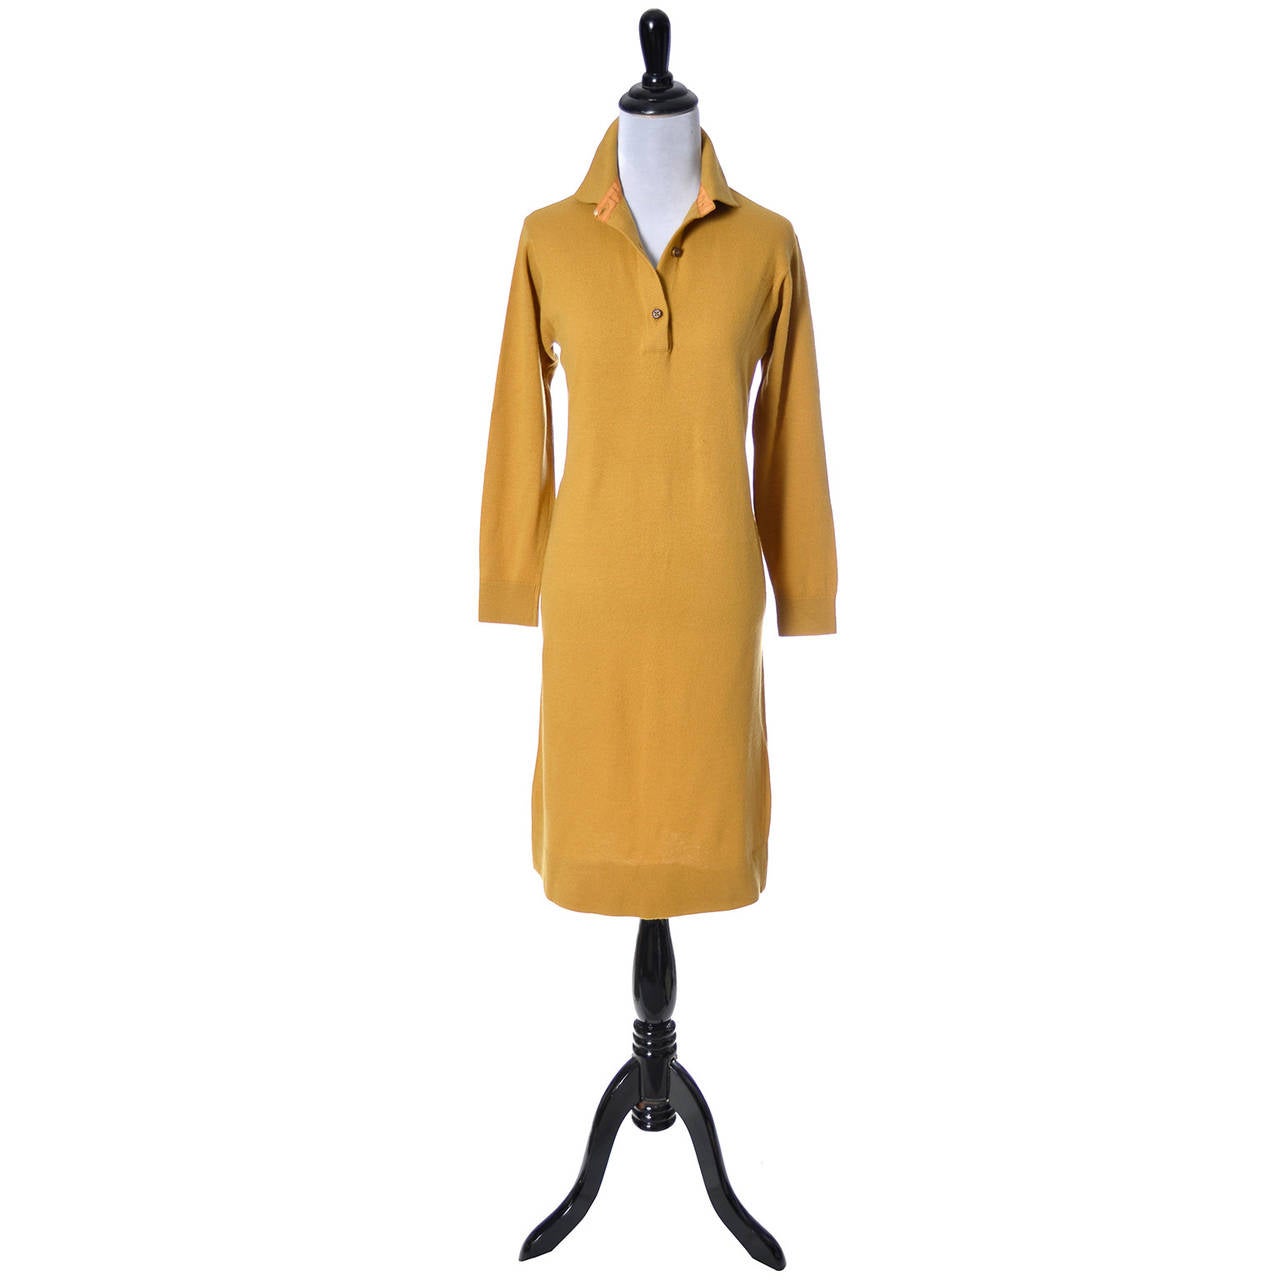 This late 1960's vintage dress is perfect for Fall and Winter, in pure cashmere, and was designed by Bonnie Cashin for Sills. This mustard cashmere sweater dress was made in Scotland, is in mint condition and would make a perfect addition to any